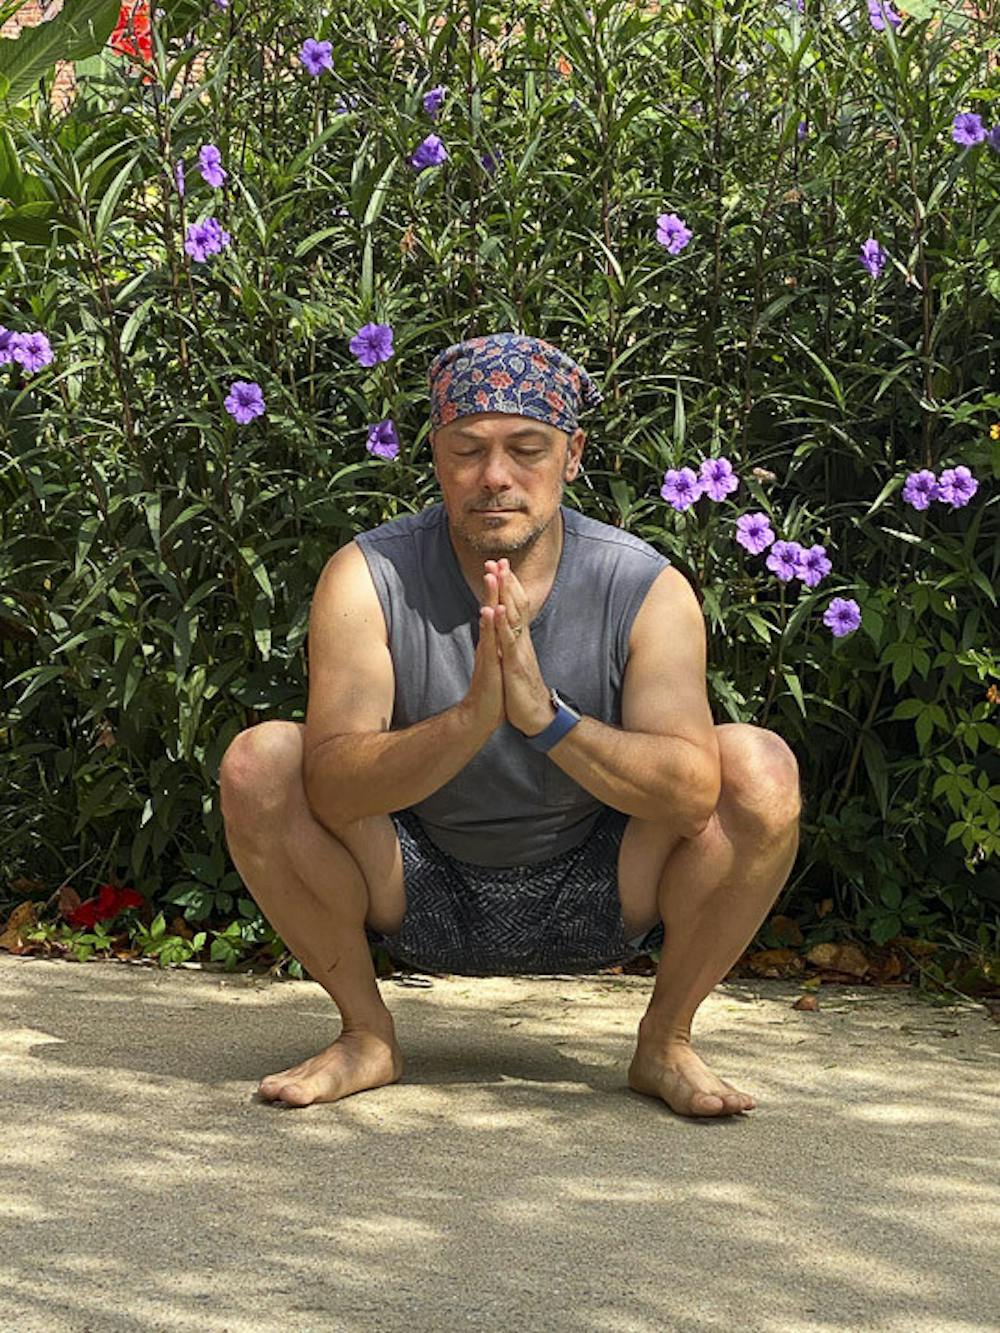 <p>David Moscowitz, a professor at the School of Journalism and Mass Communications sits in the Malasana pose, a.k.a. the Garland pose on Sept. 5, 2020. Moscowitz offers donation funded yoga lessons at Rooted Yoga, on Sunday afternoons.&nbsp;</p>